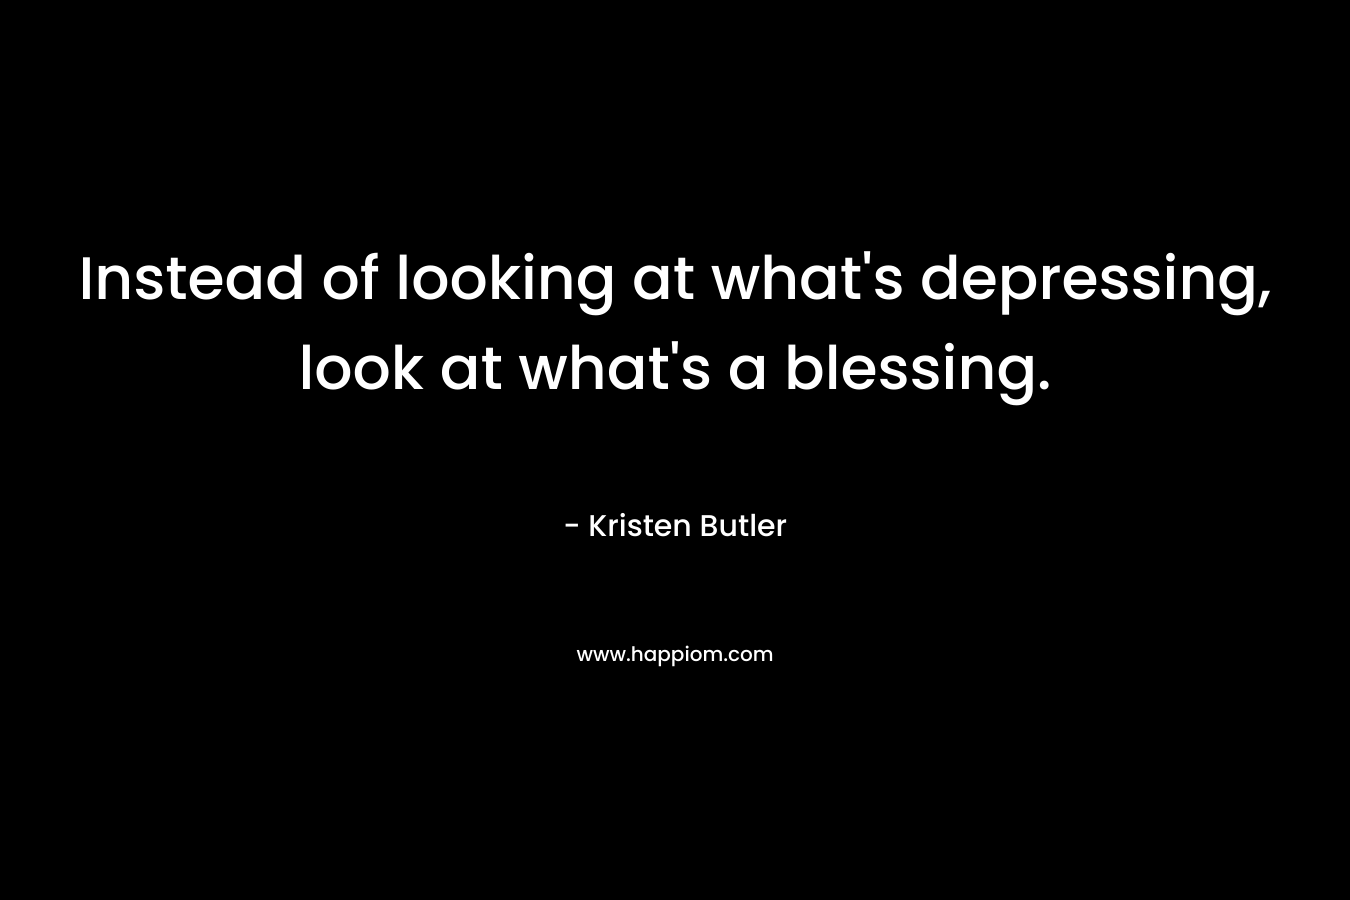 Instead of looking at what’s depressing, look at what’s a blessing. – Kristen Butler